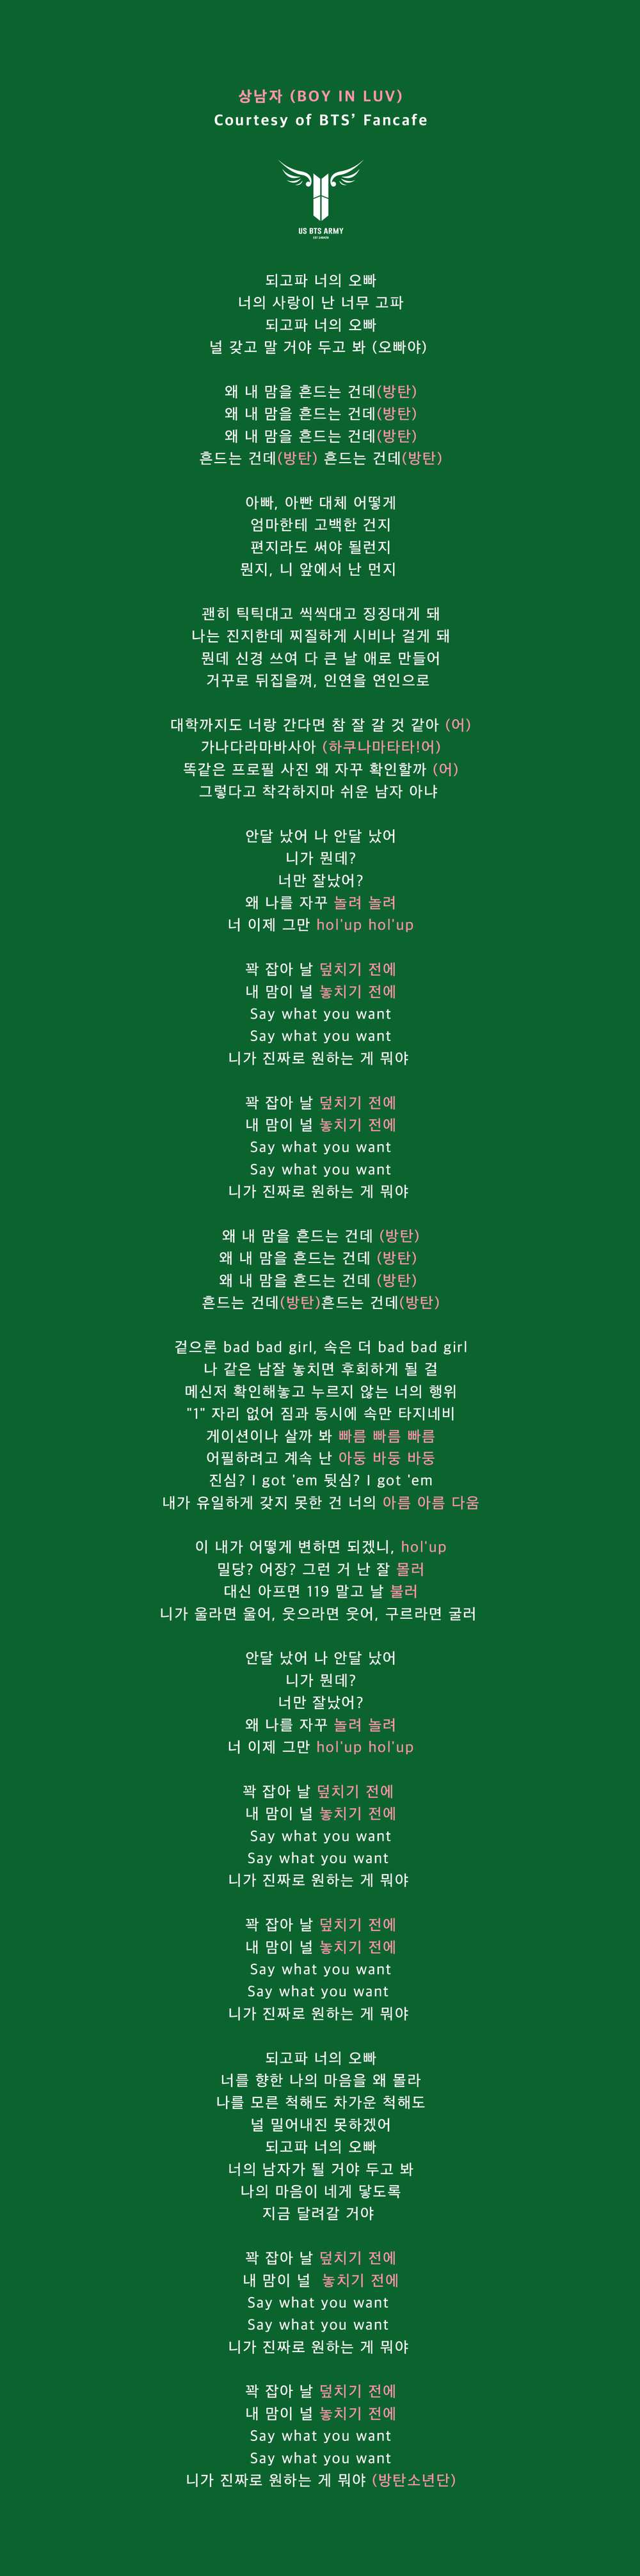 Official '상남자 (Boy In Luv)' Fanchant — Us Bts Army